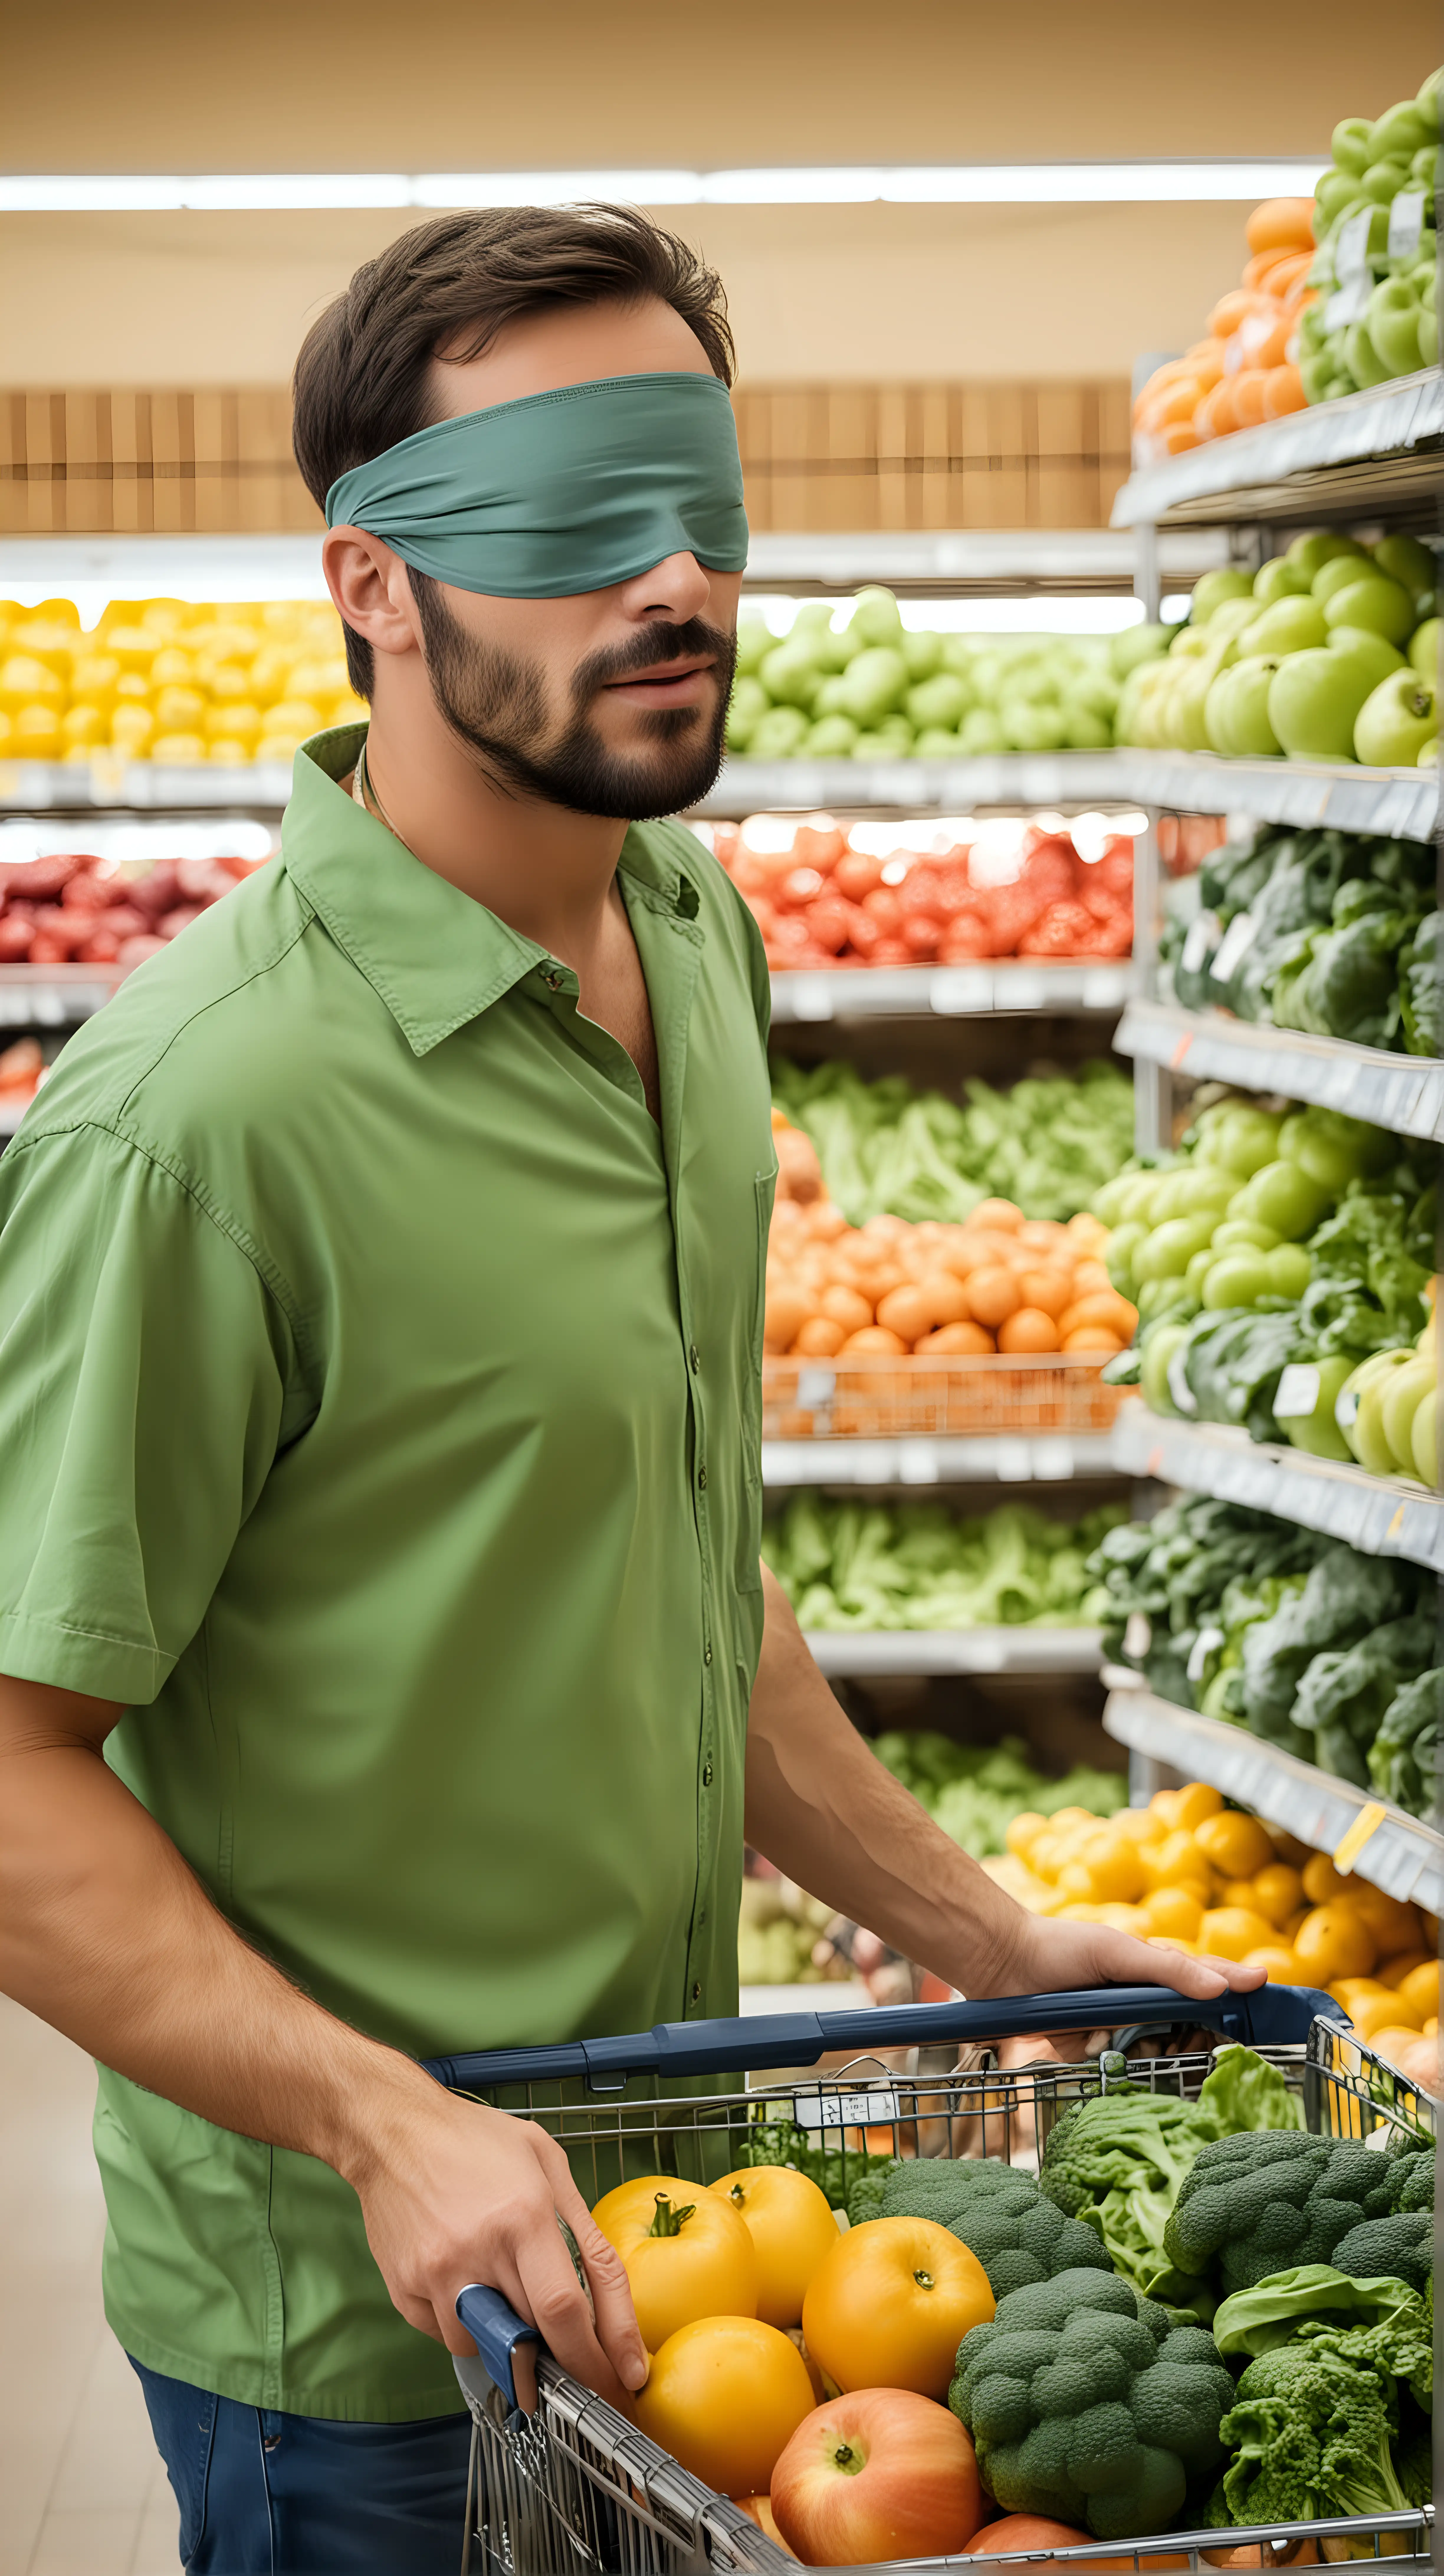 Blindfolded Man in Green Shirt Shopping in Grocery Store Produce Section